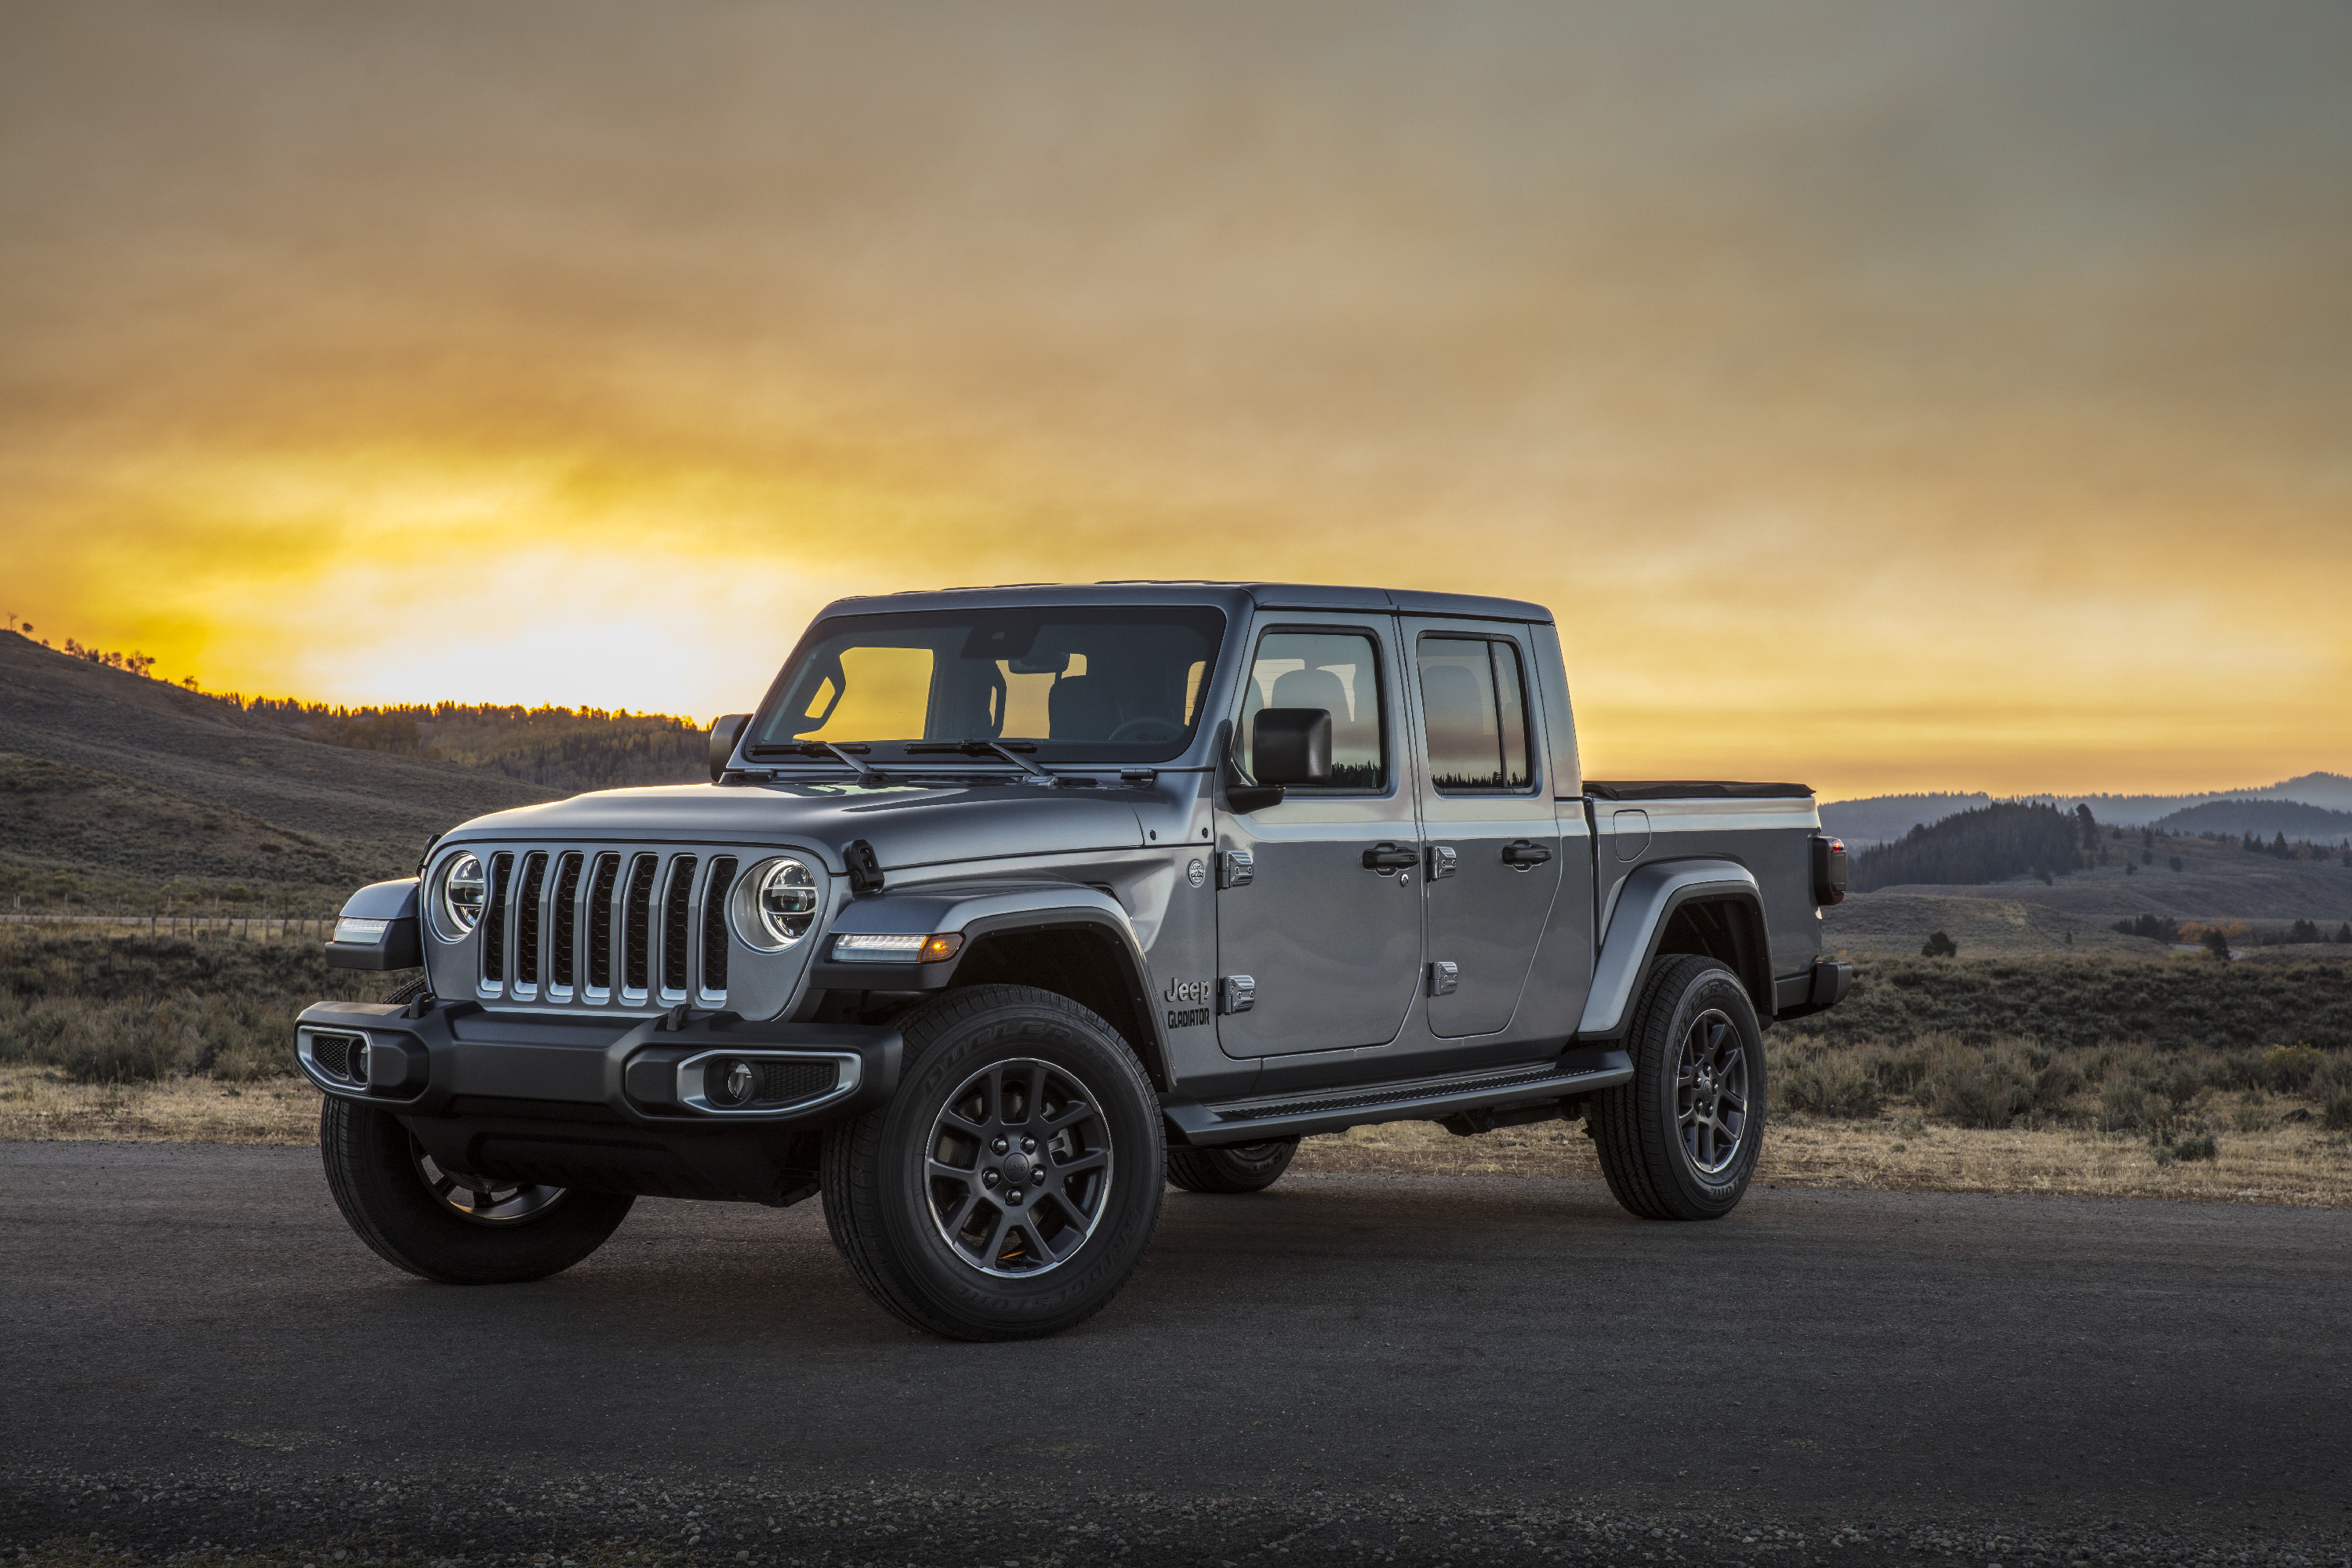 Wallpaper Of The Day: 2020 Jeep Gladiator